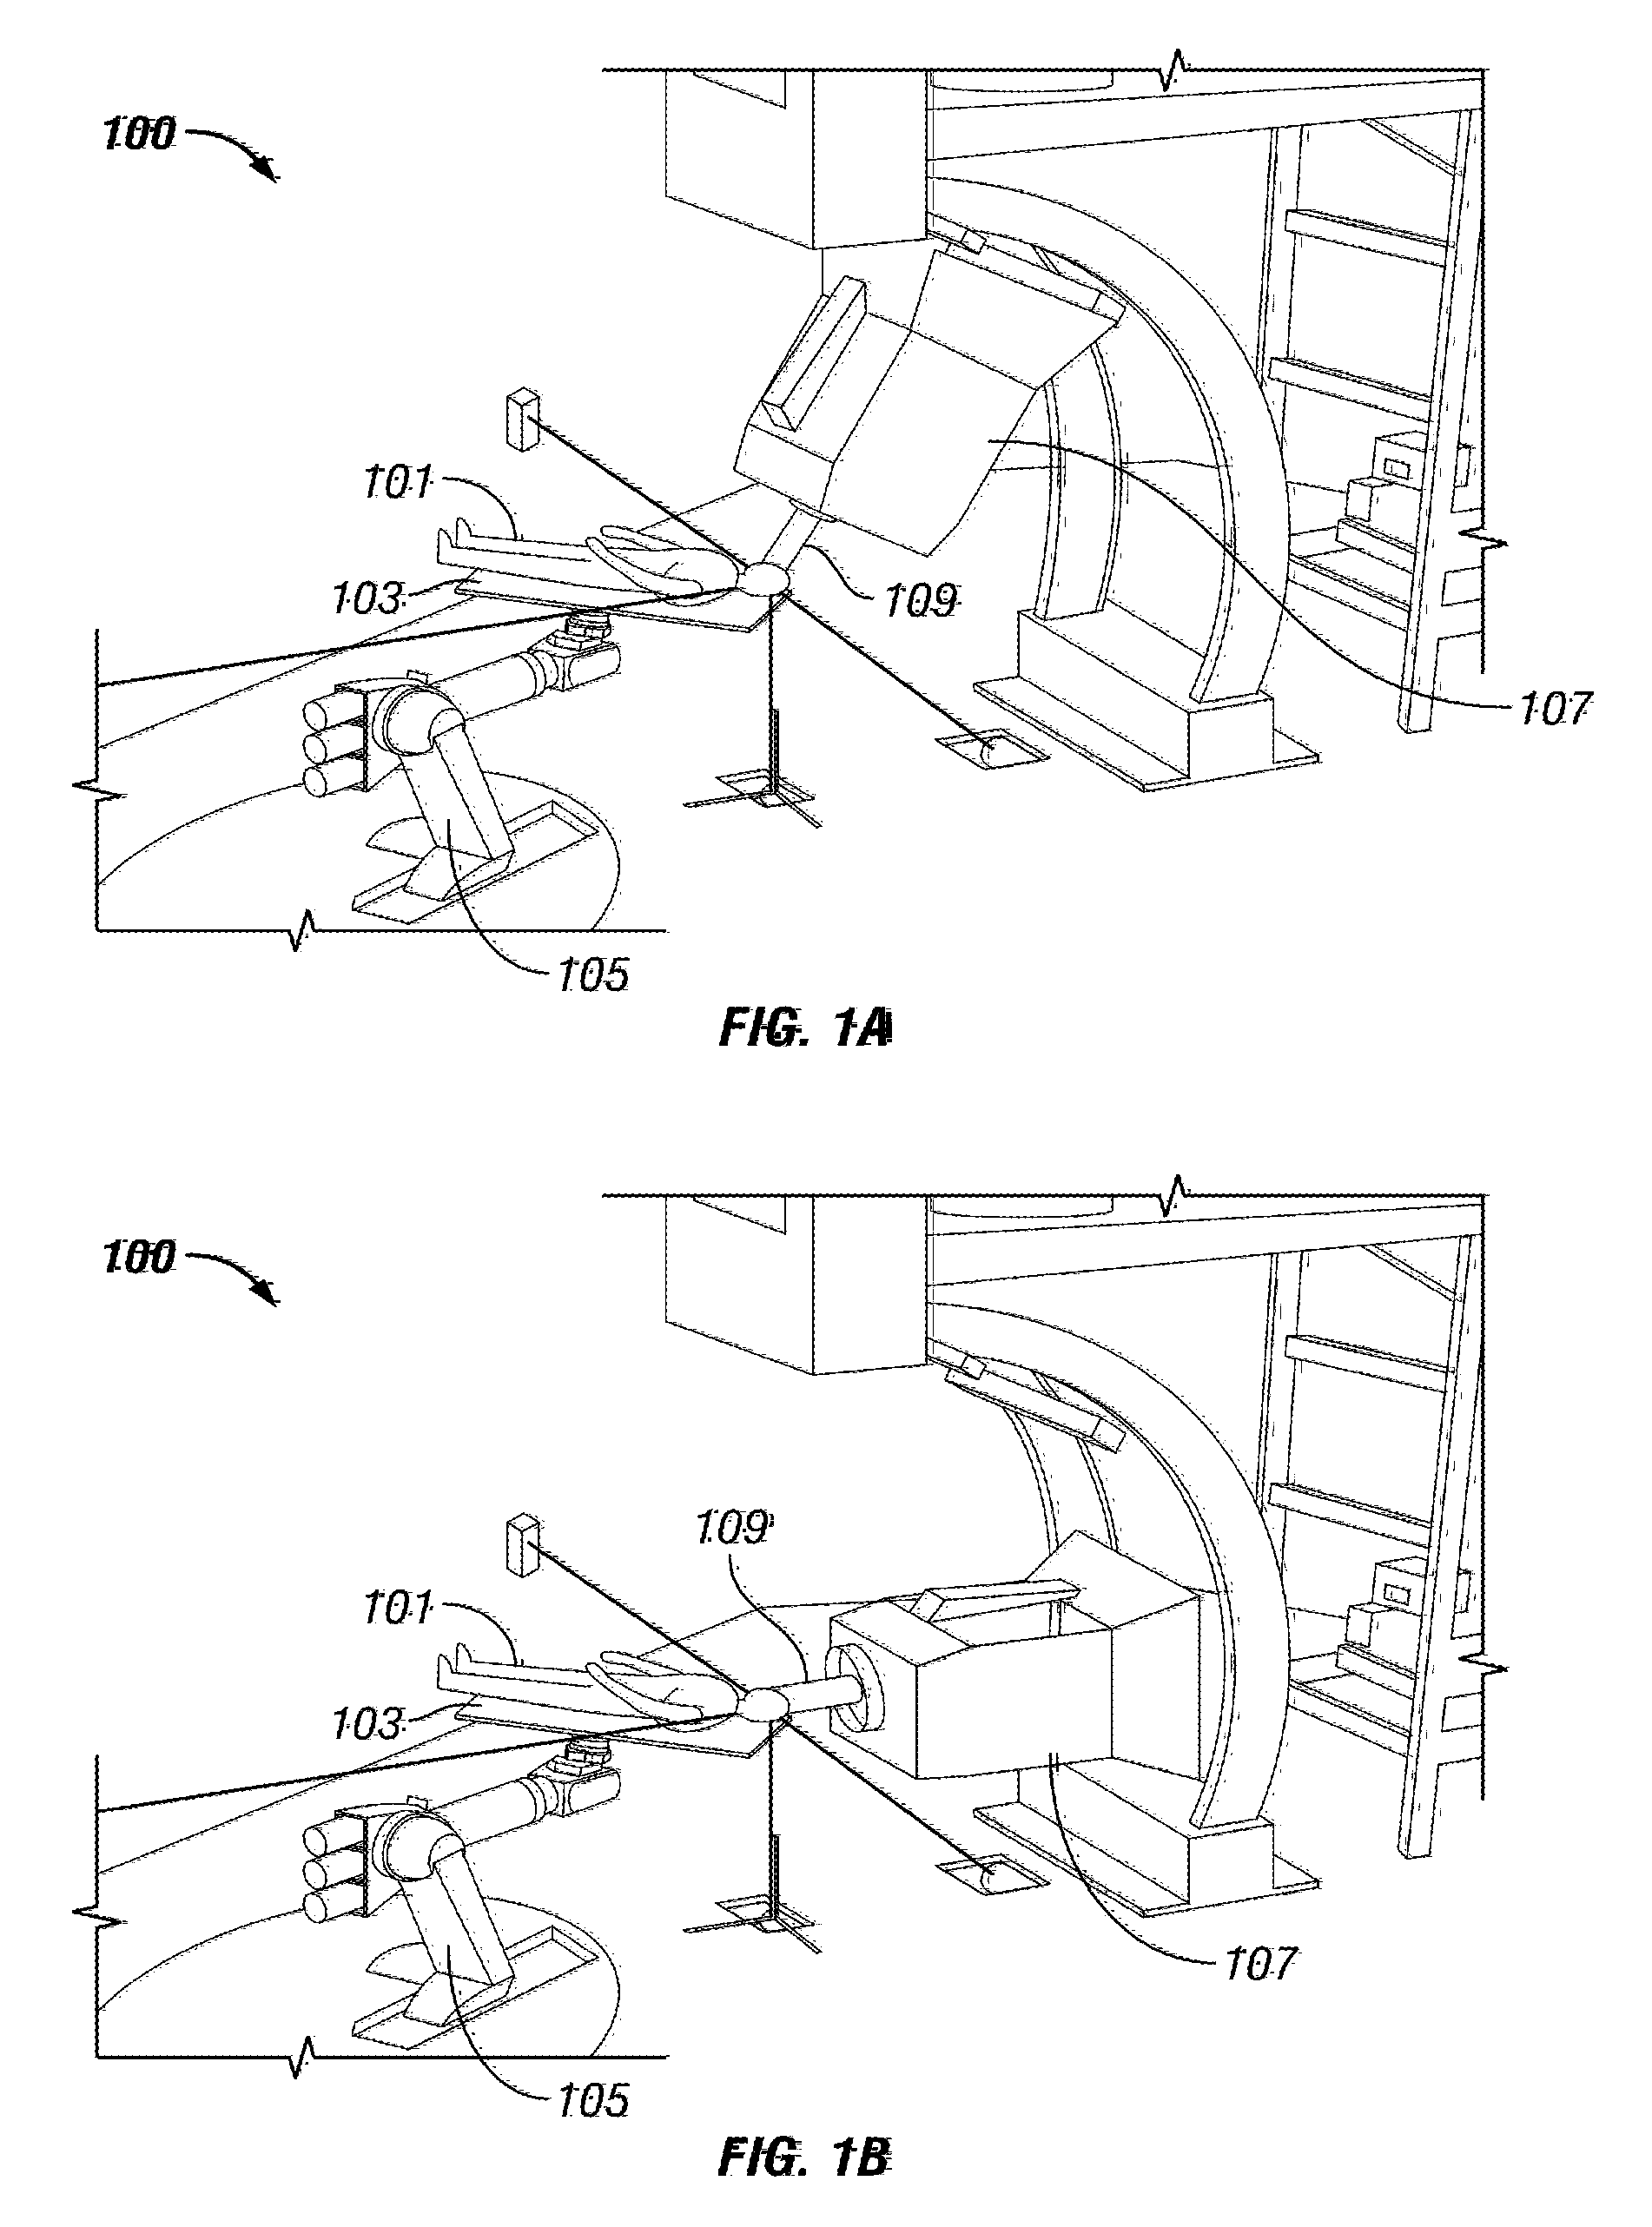 System and Method for Radiation Therapy Imaging and Treatment Workflow Scheduling and Optimization